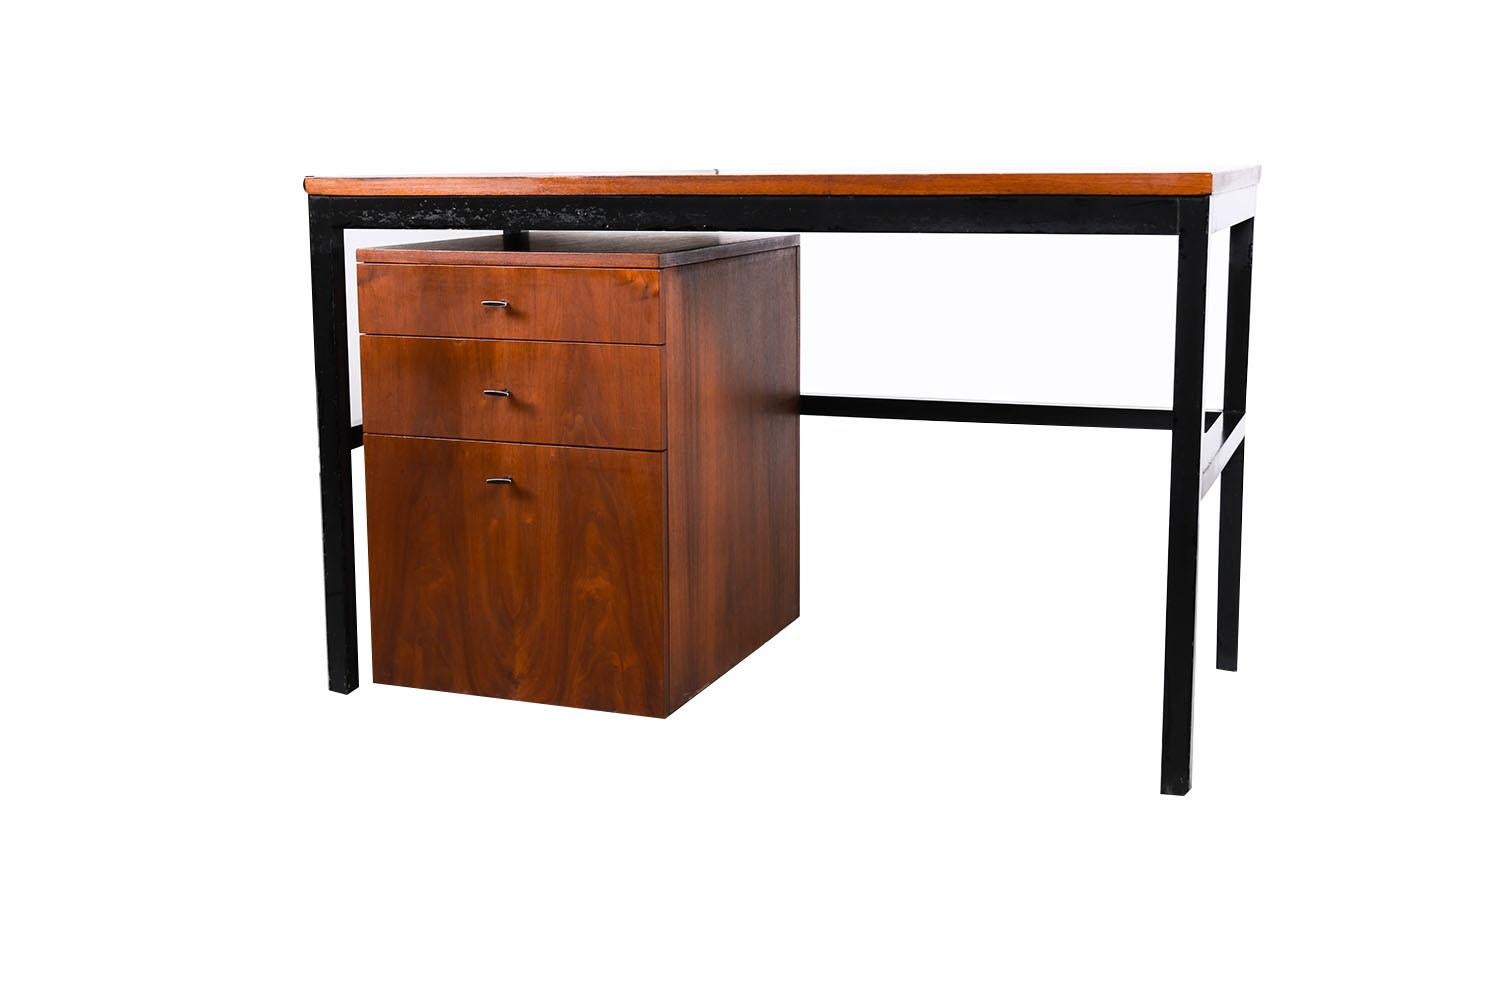 Fabulous parsons writing desk or console table with modular file cabinets designed by Milo Baughman for Directional Furniture Company, circa 1960s, USA. Featuring sophisticated, sleek lines characteristic of Baughman’s renowned MCM style, integrated